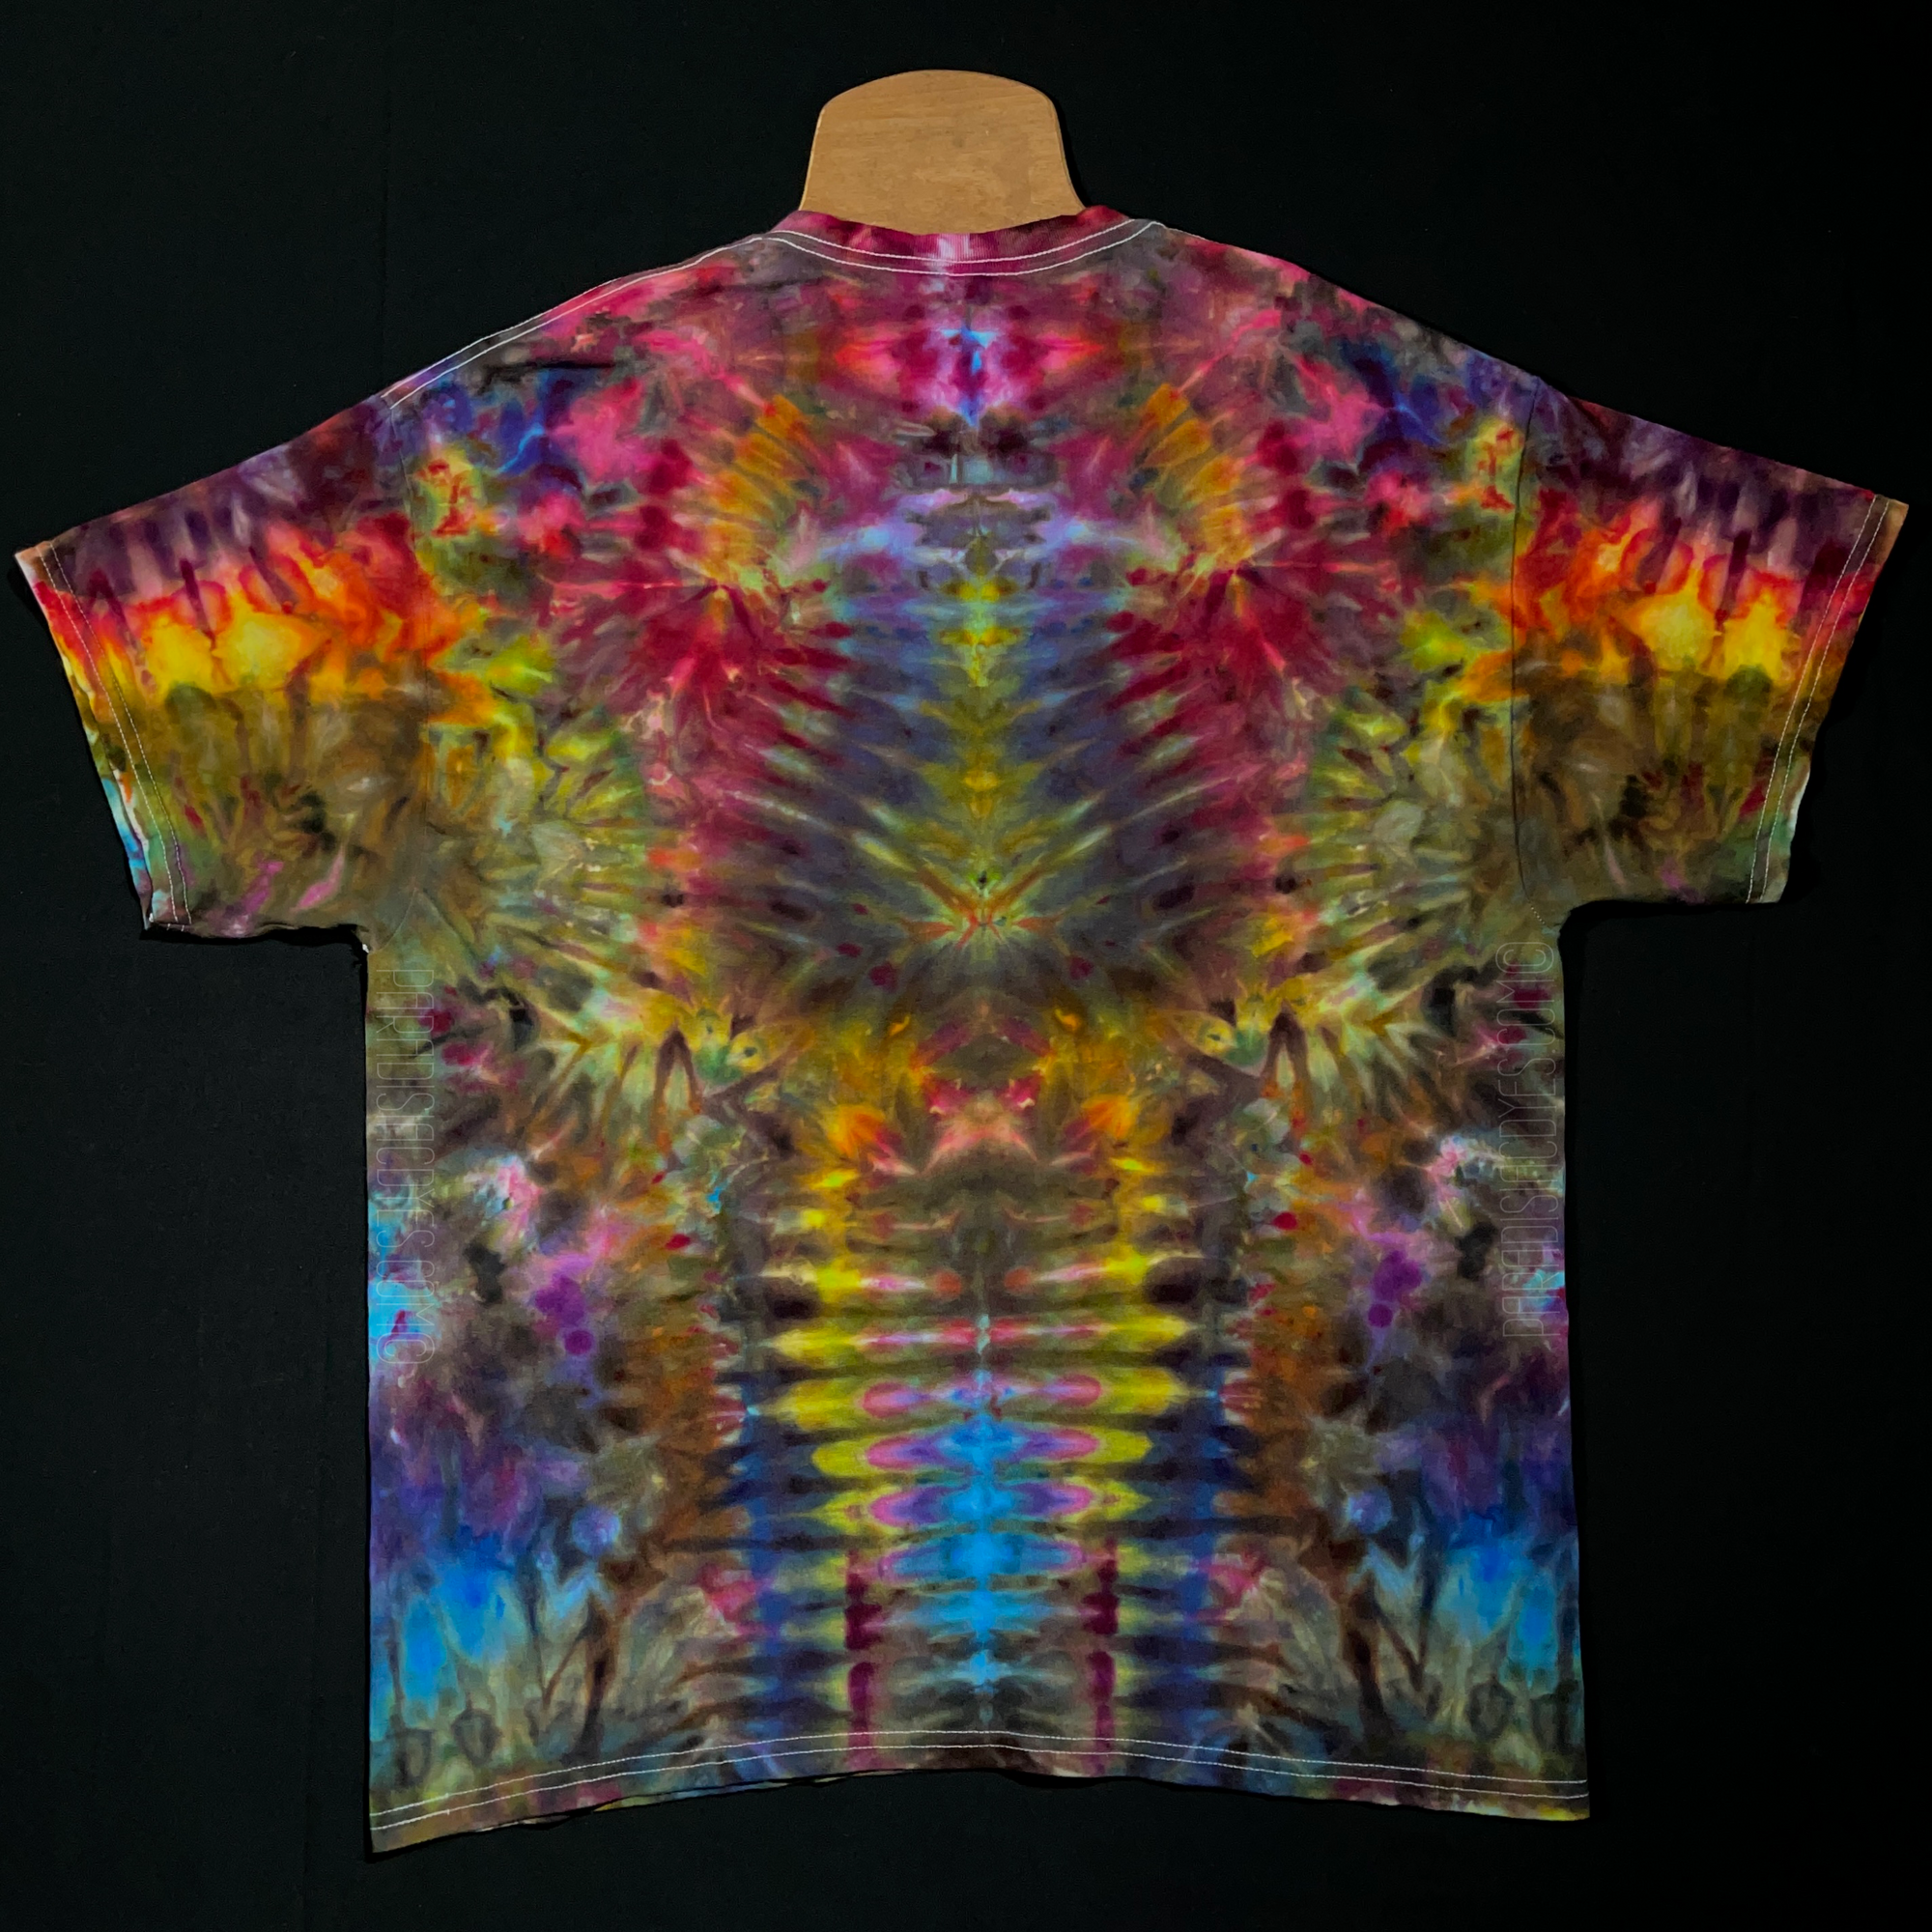 Back side of the same rainbow gradient psychedelic mindscape ice tie-dyed short sleeve shirt design; laid flat on a solid black background